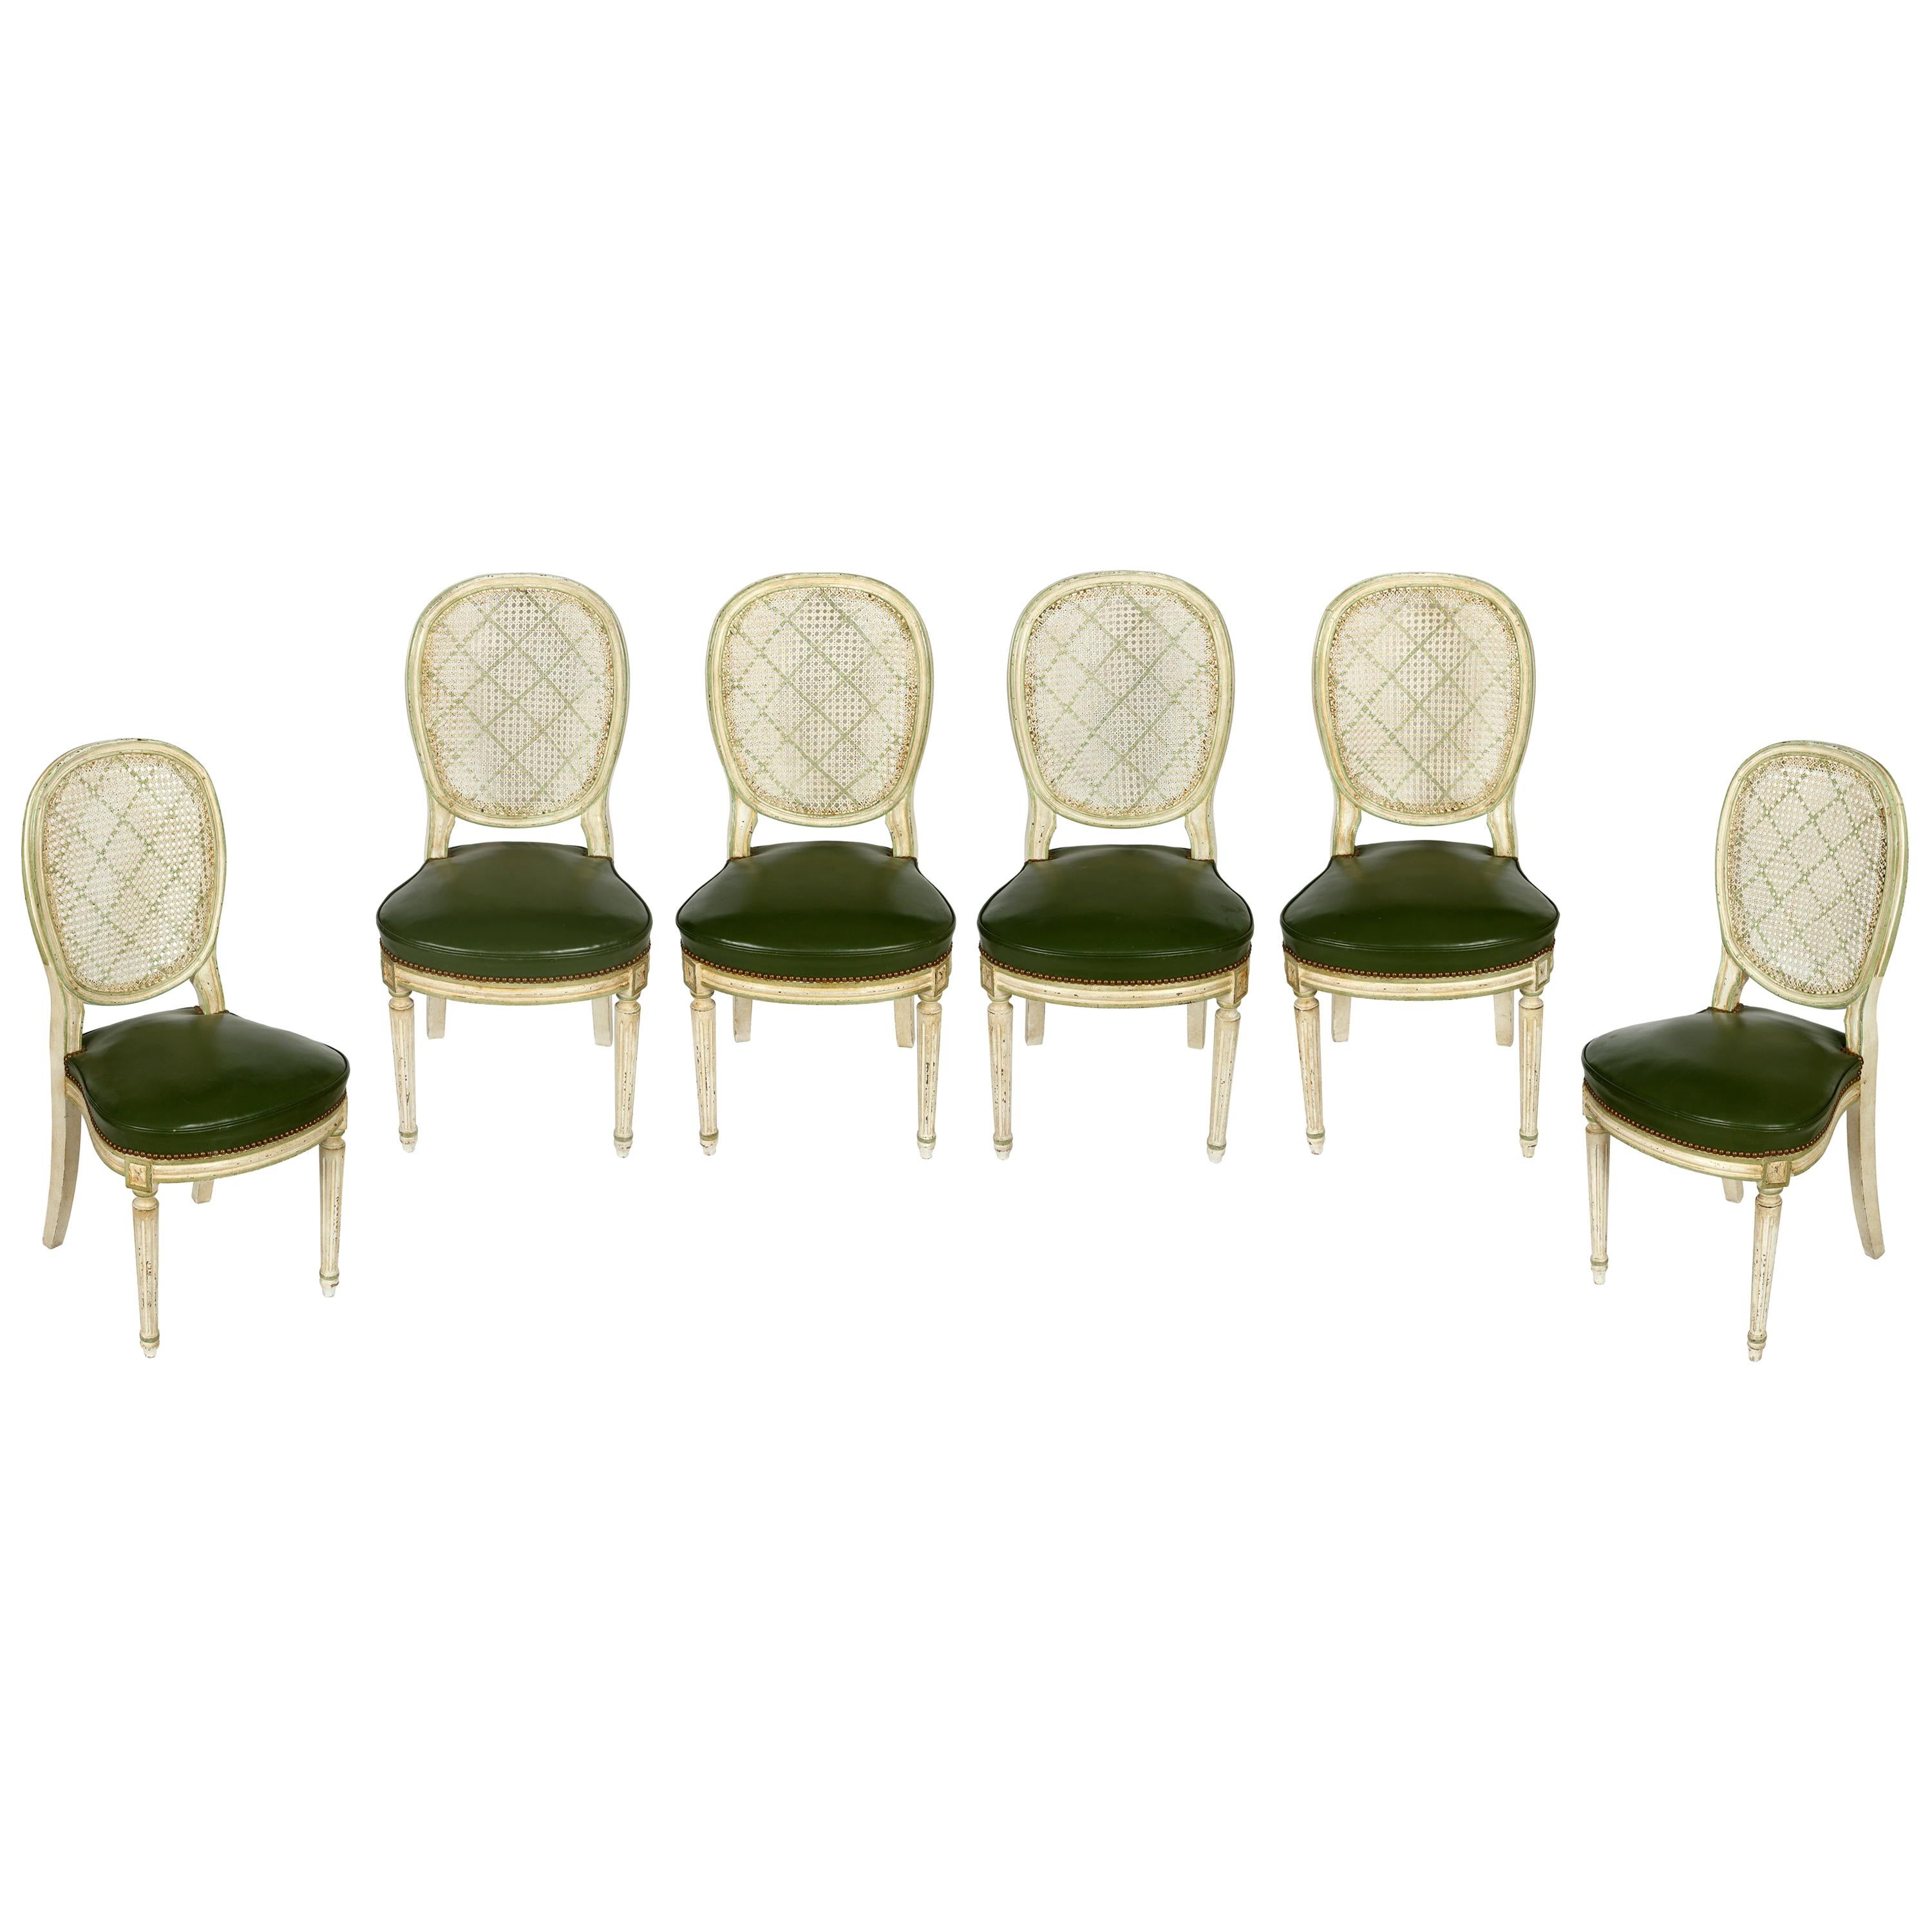 Set of Six Louis XVI Round Back Leather Seat Dining Chairs